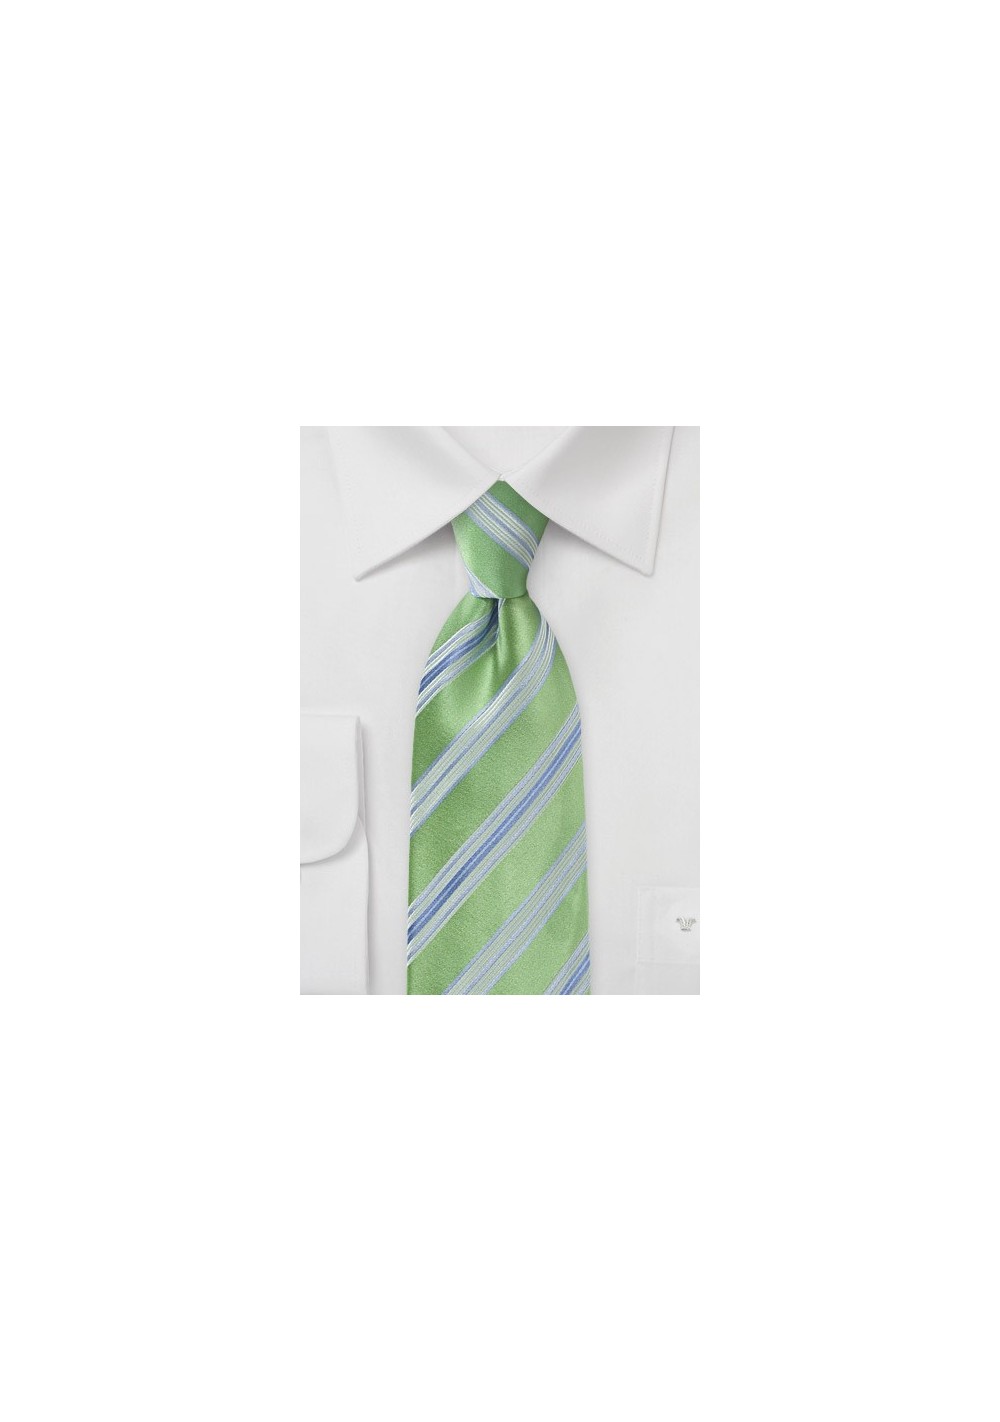 Striped Tie in Spring Green and Lilac